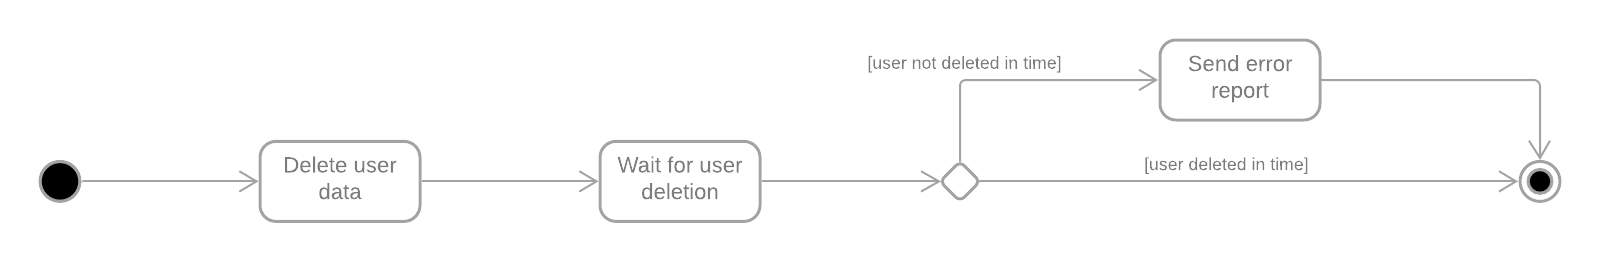 gdpr-application-workflow-abstract-subsystem